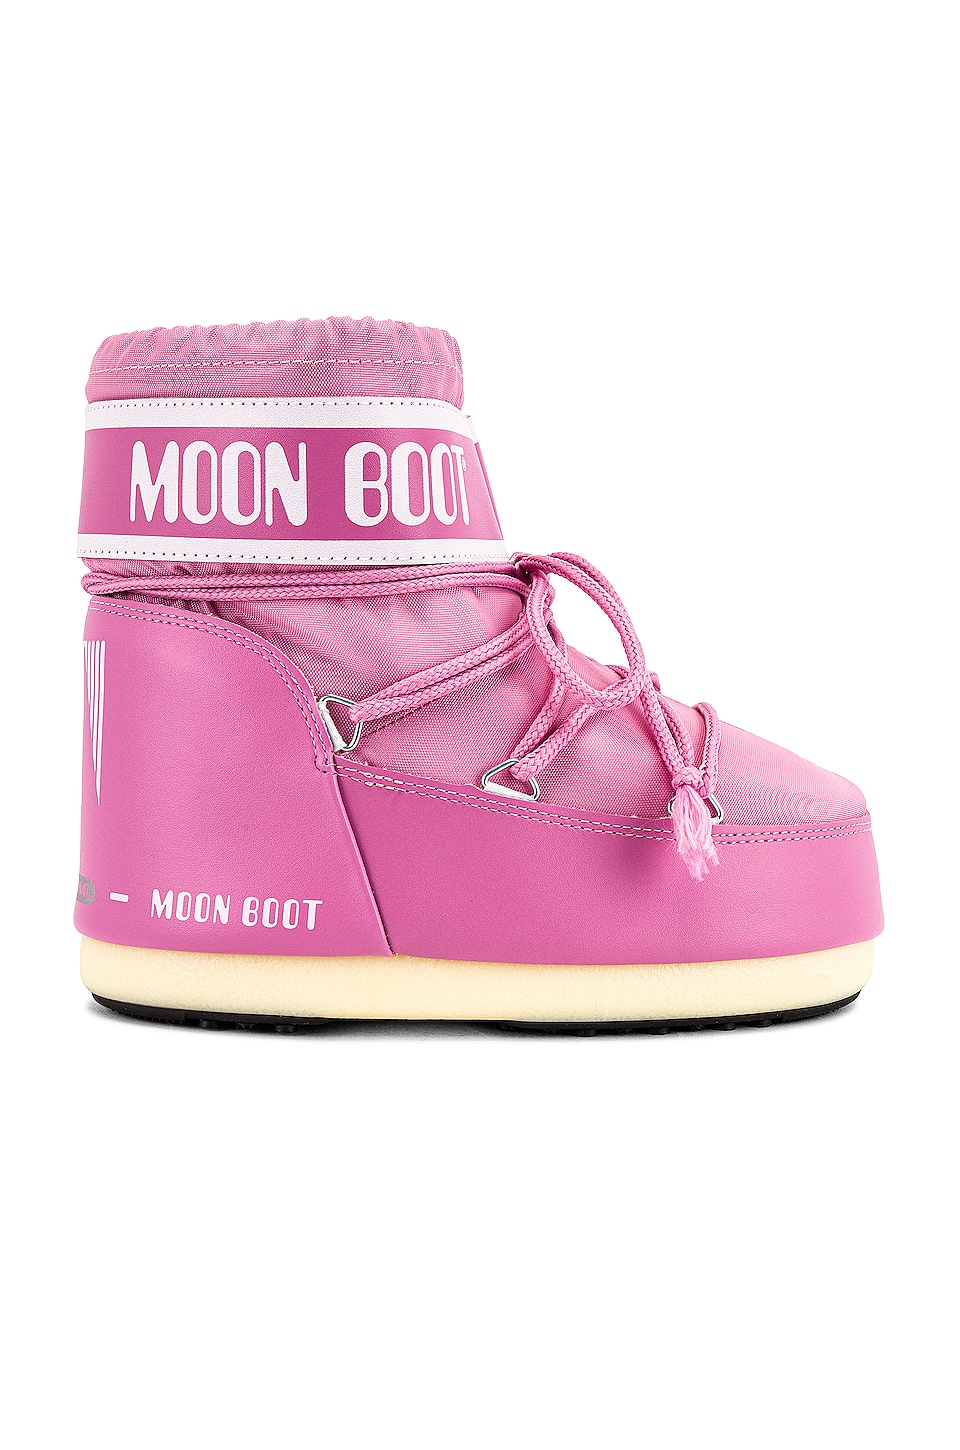 MOON BOOT Classic Low 2 Bootie in Pink